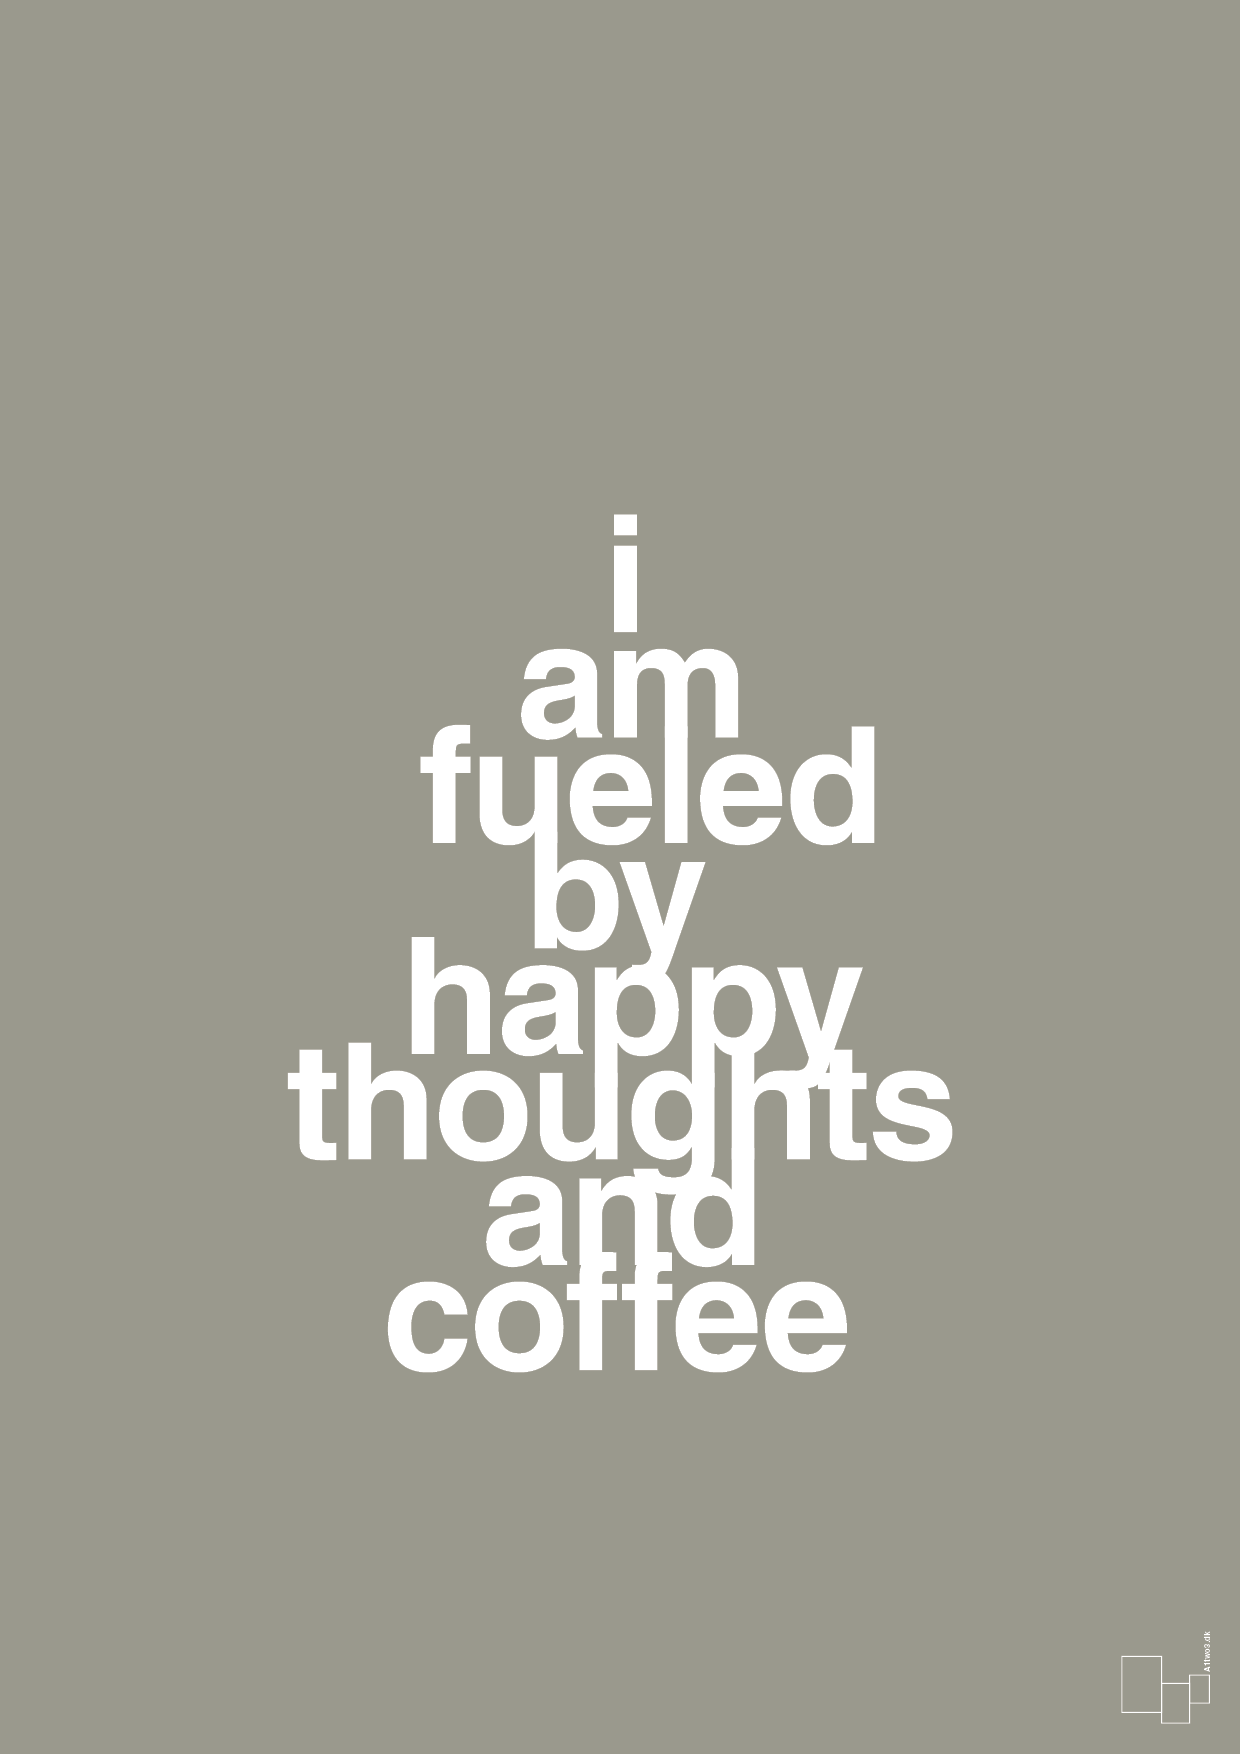 i am fueled by happy thoughts and coffee - Plakat med Mad & Drikke i Battleship Gray